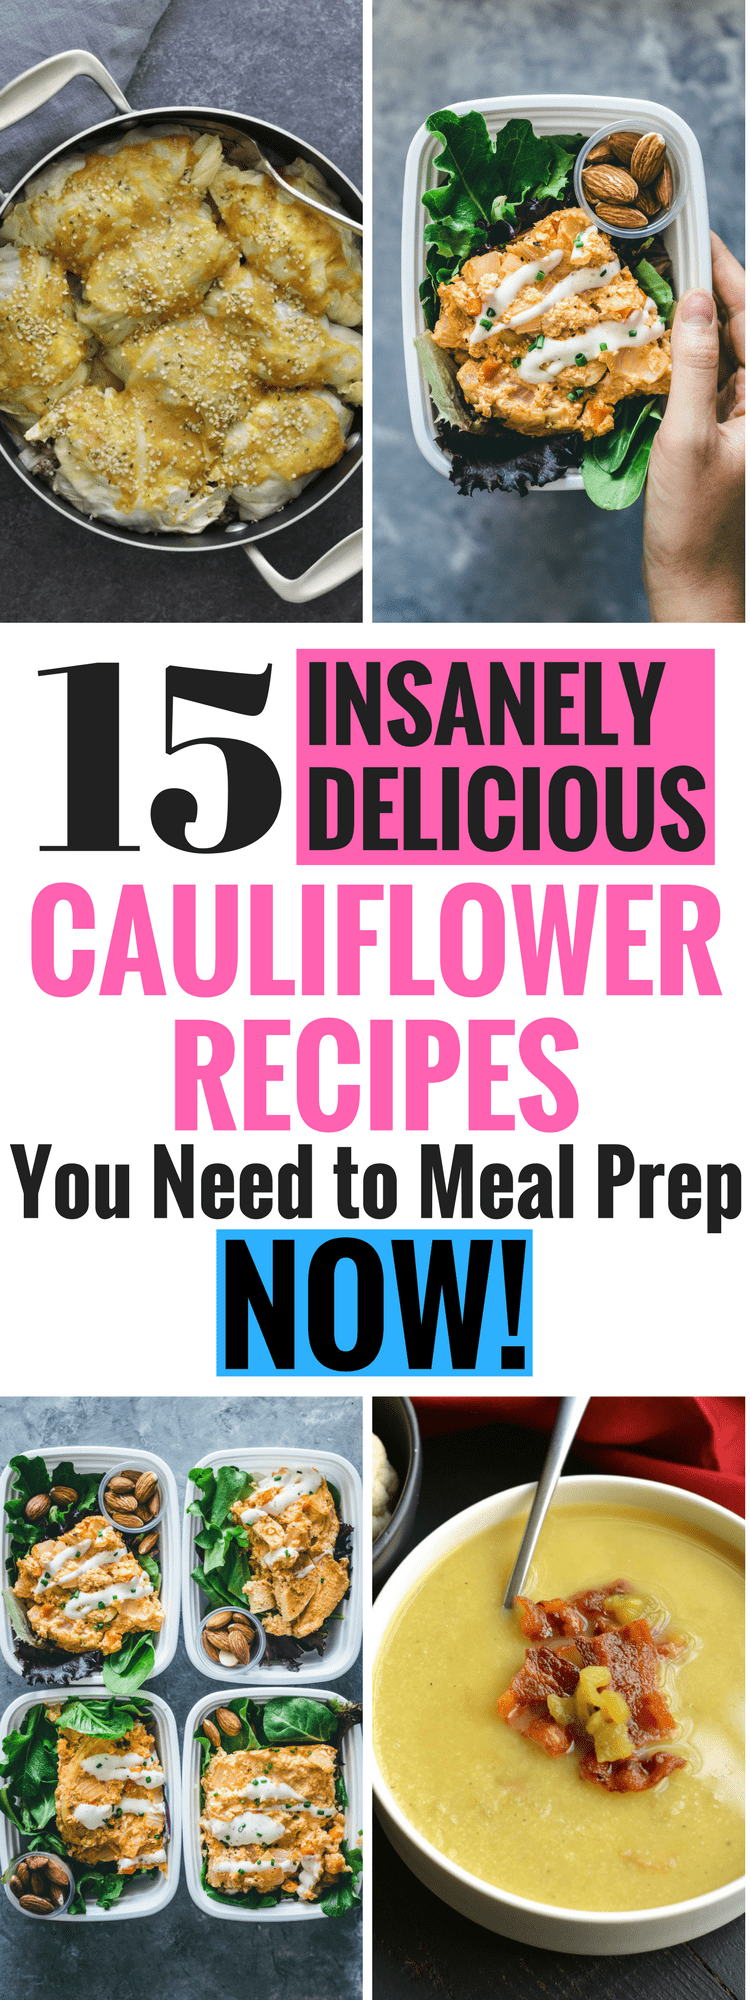 15 Insanely Delicious Cauliflower Recipes You Need To Meal Prep NOW!